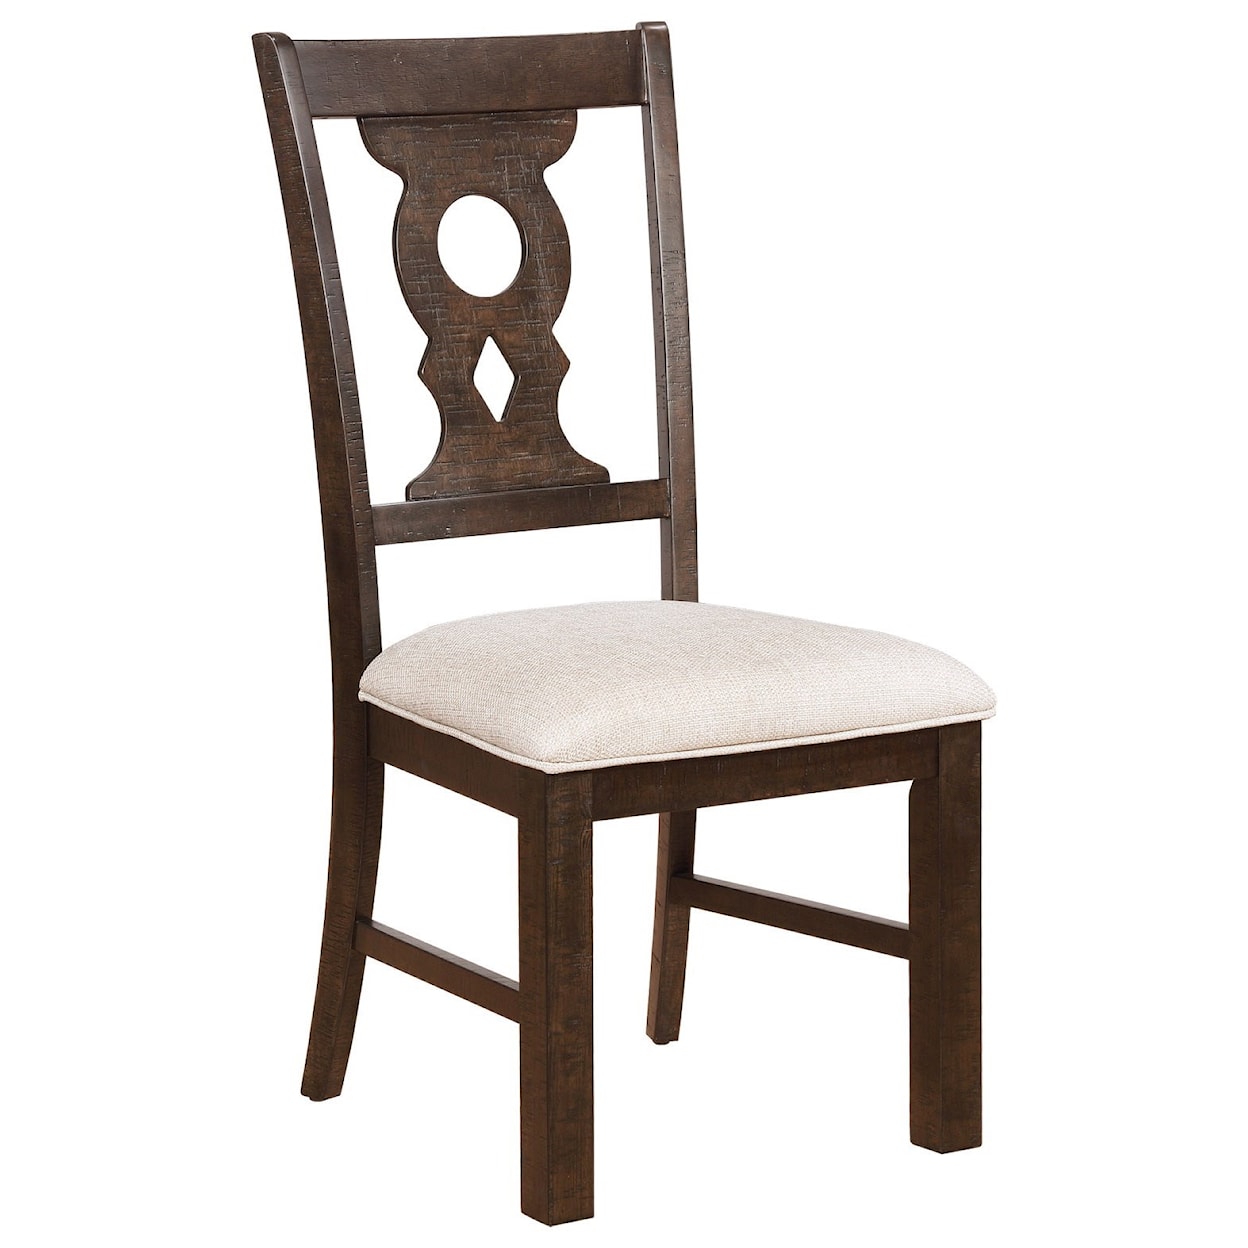 Avalon Furniture Lancaster Table Set with Bench